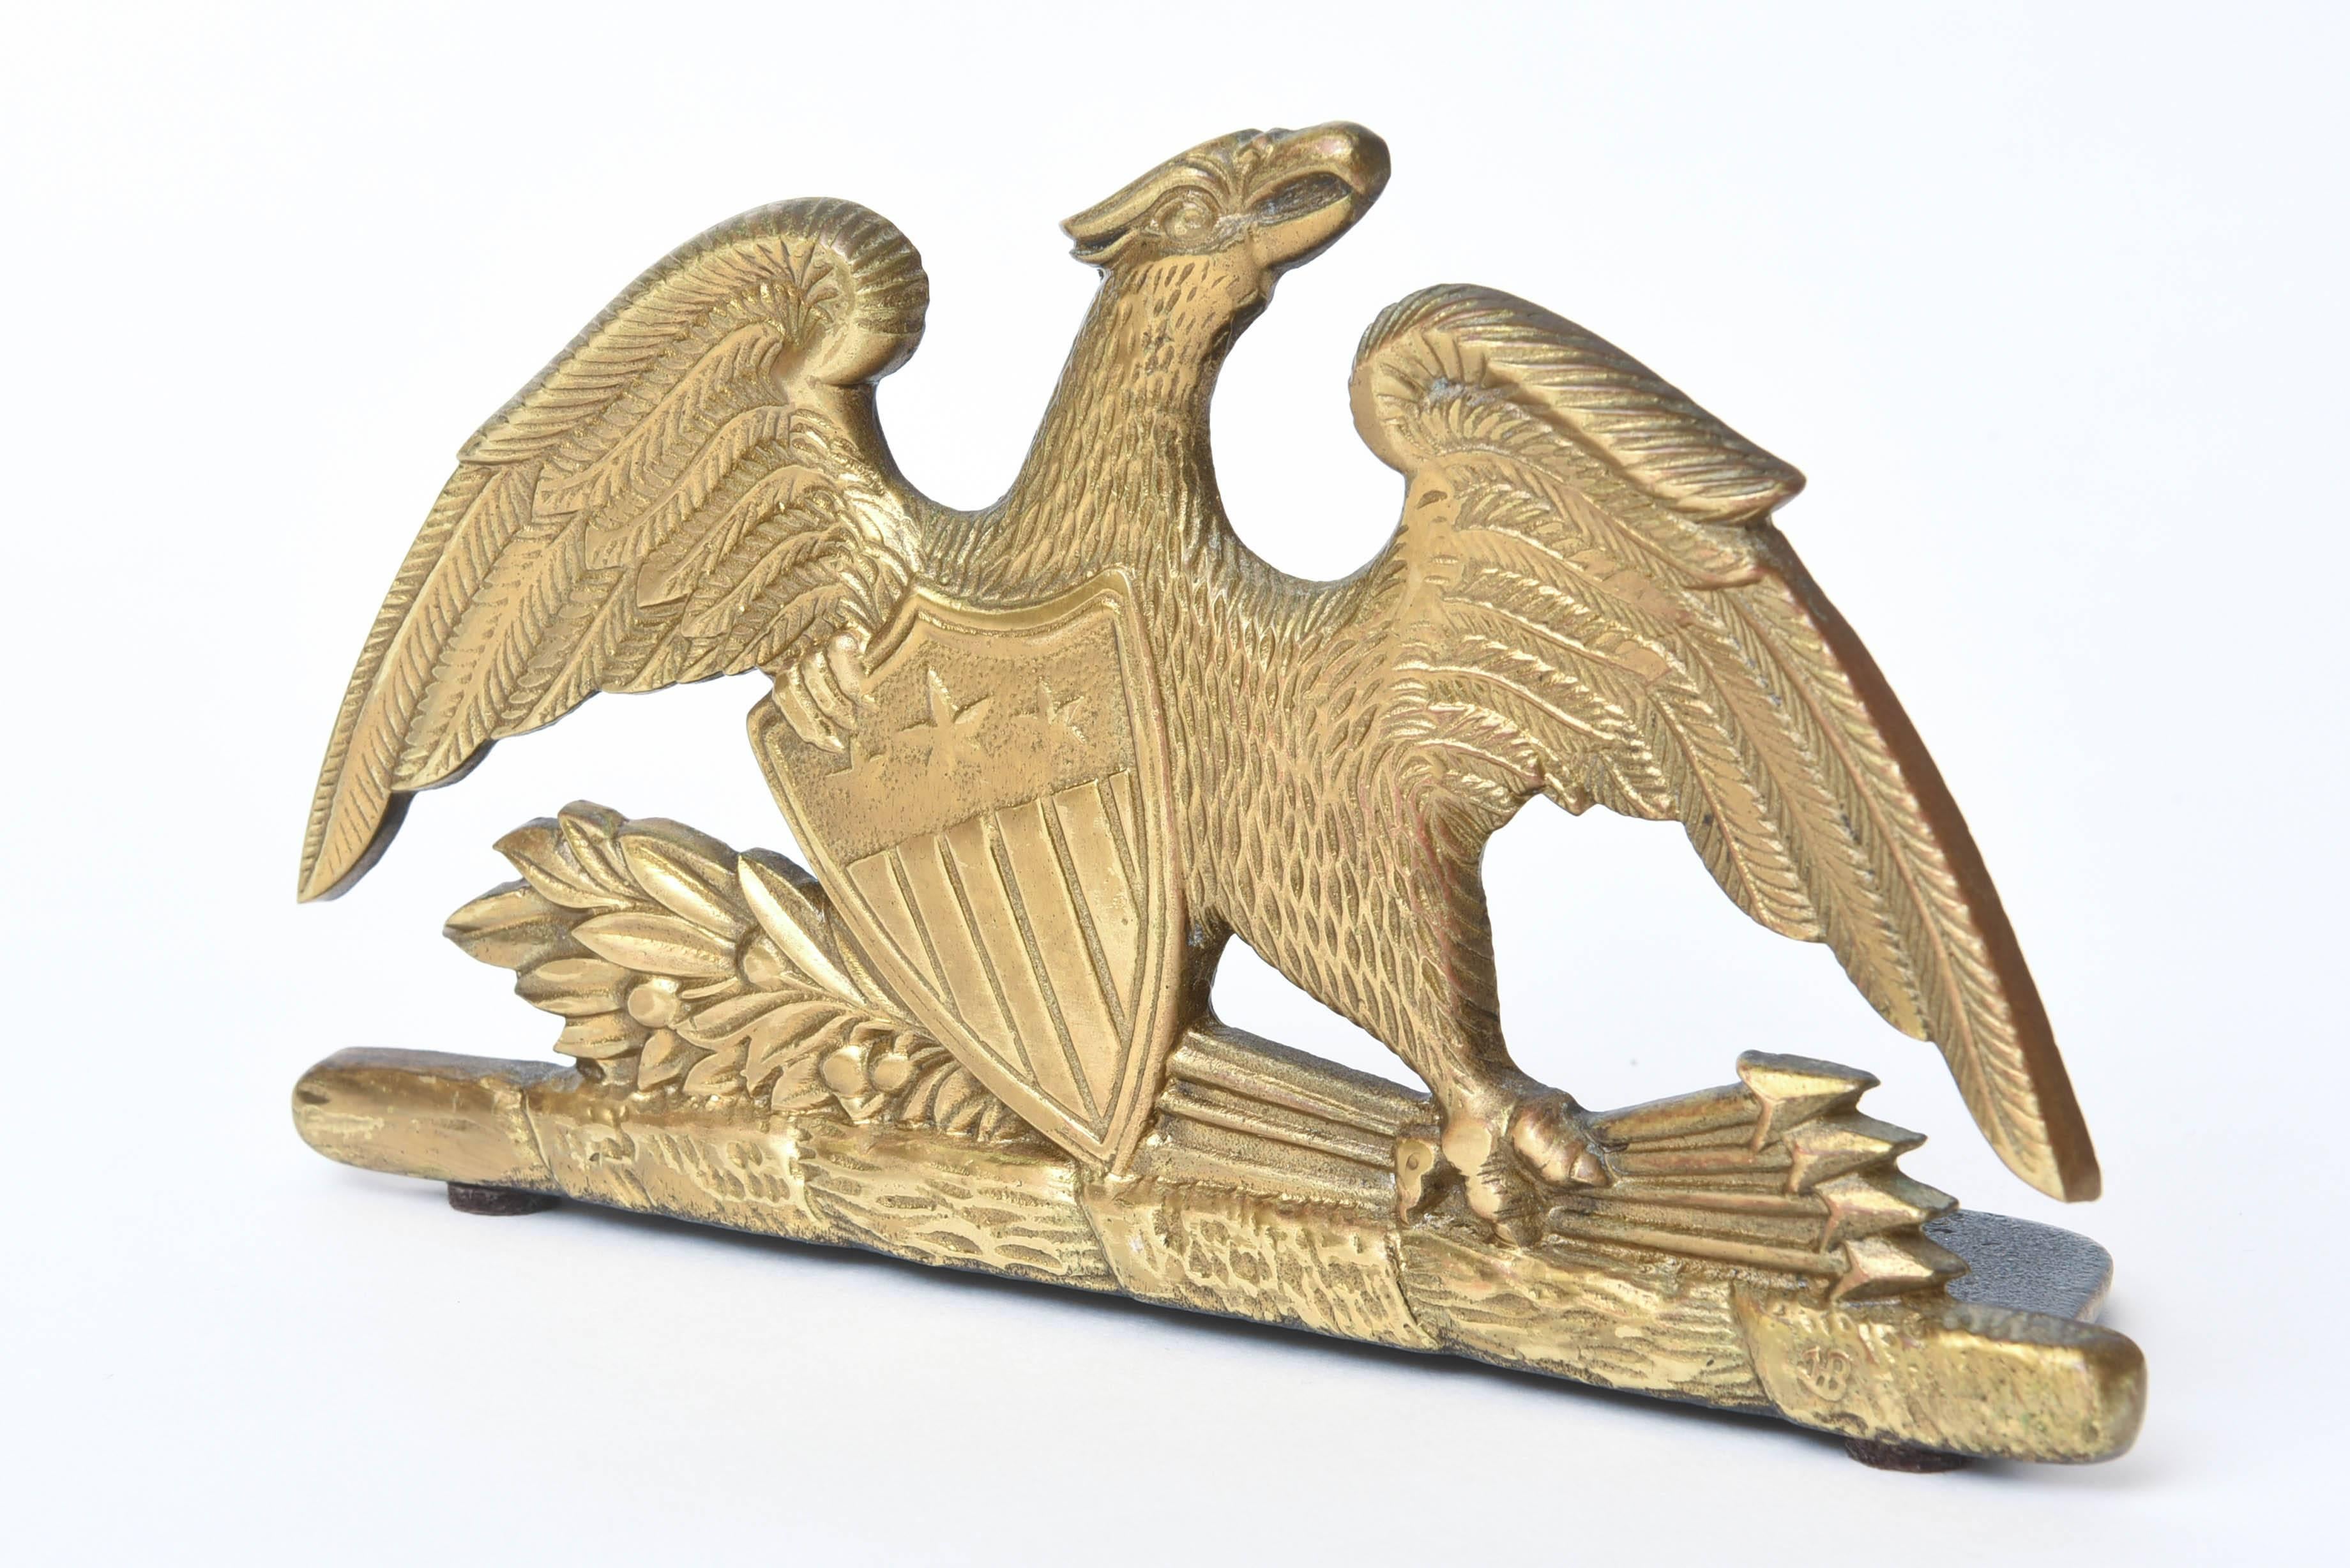 A fine and Classic pair of bookends featuring our nation's emblem of a majestic eagle clutching an olive branch and arrows. Signed and hallmarked 1952 VA Metal Crafters. This pair is in great vintage condition.